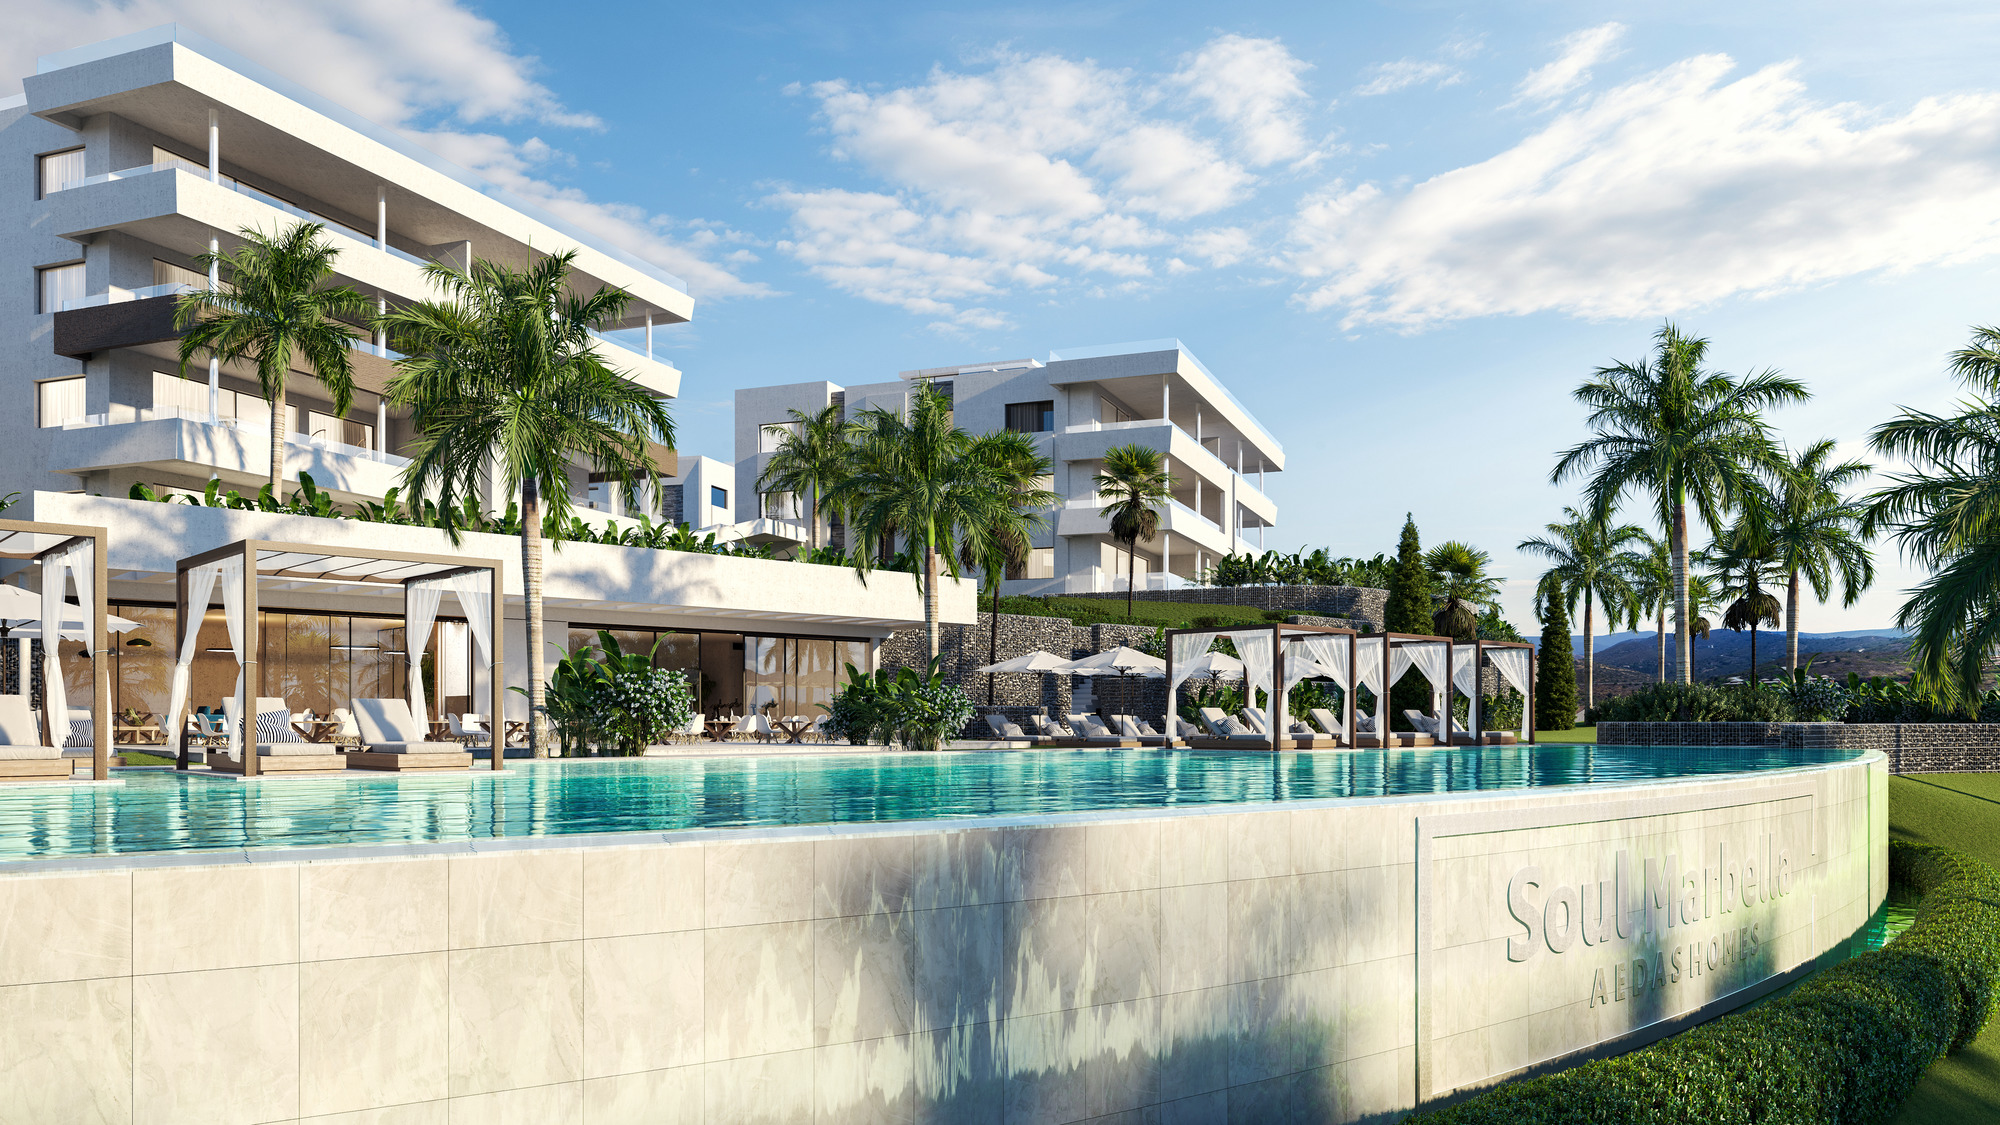 Spectacular apartments surrounded by Santa Clara’s Golf course, Soul Marbella